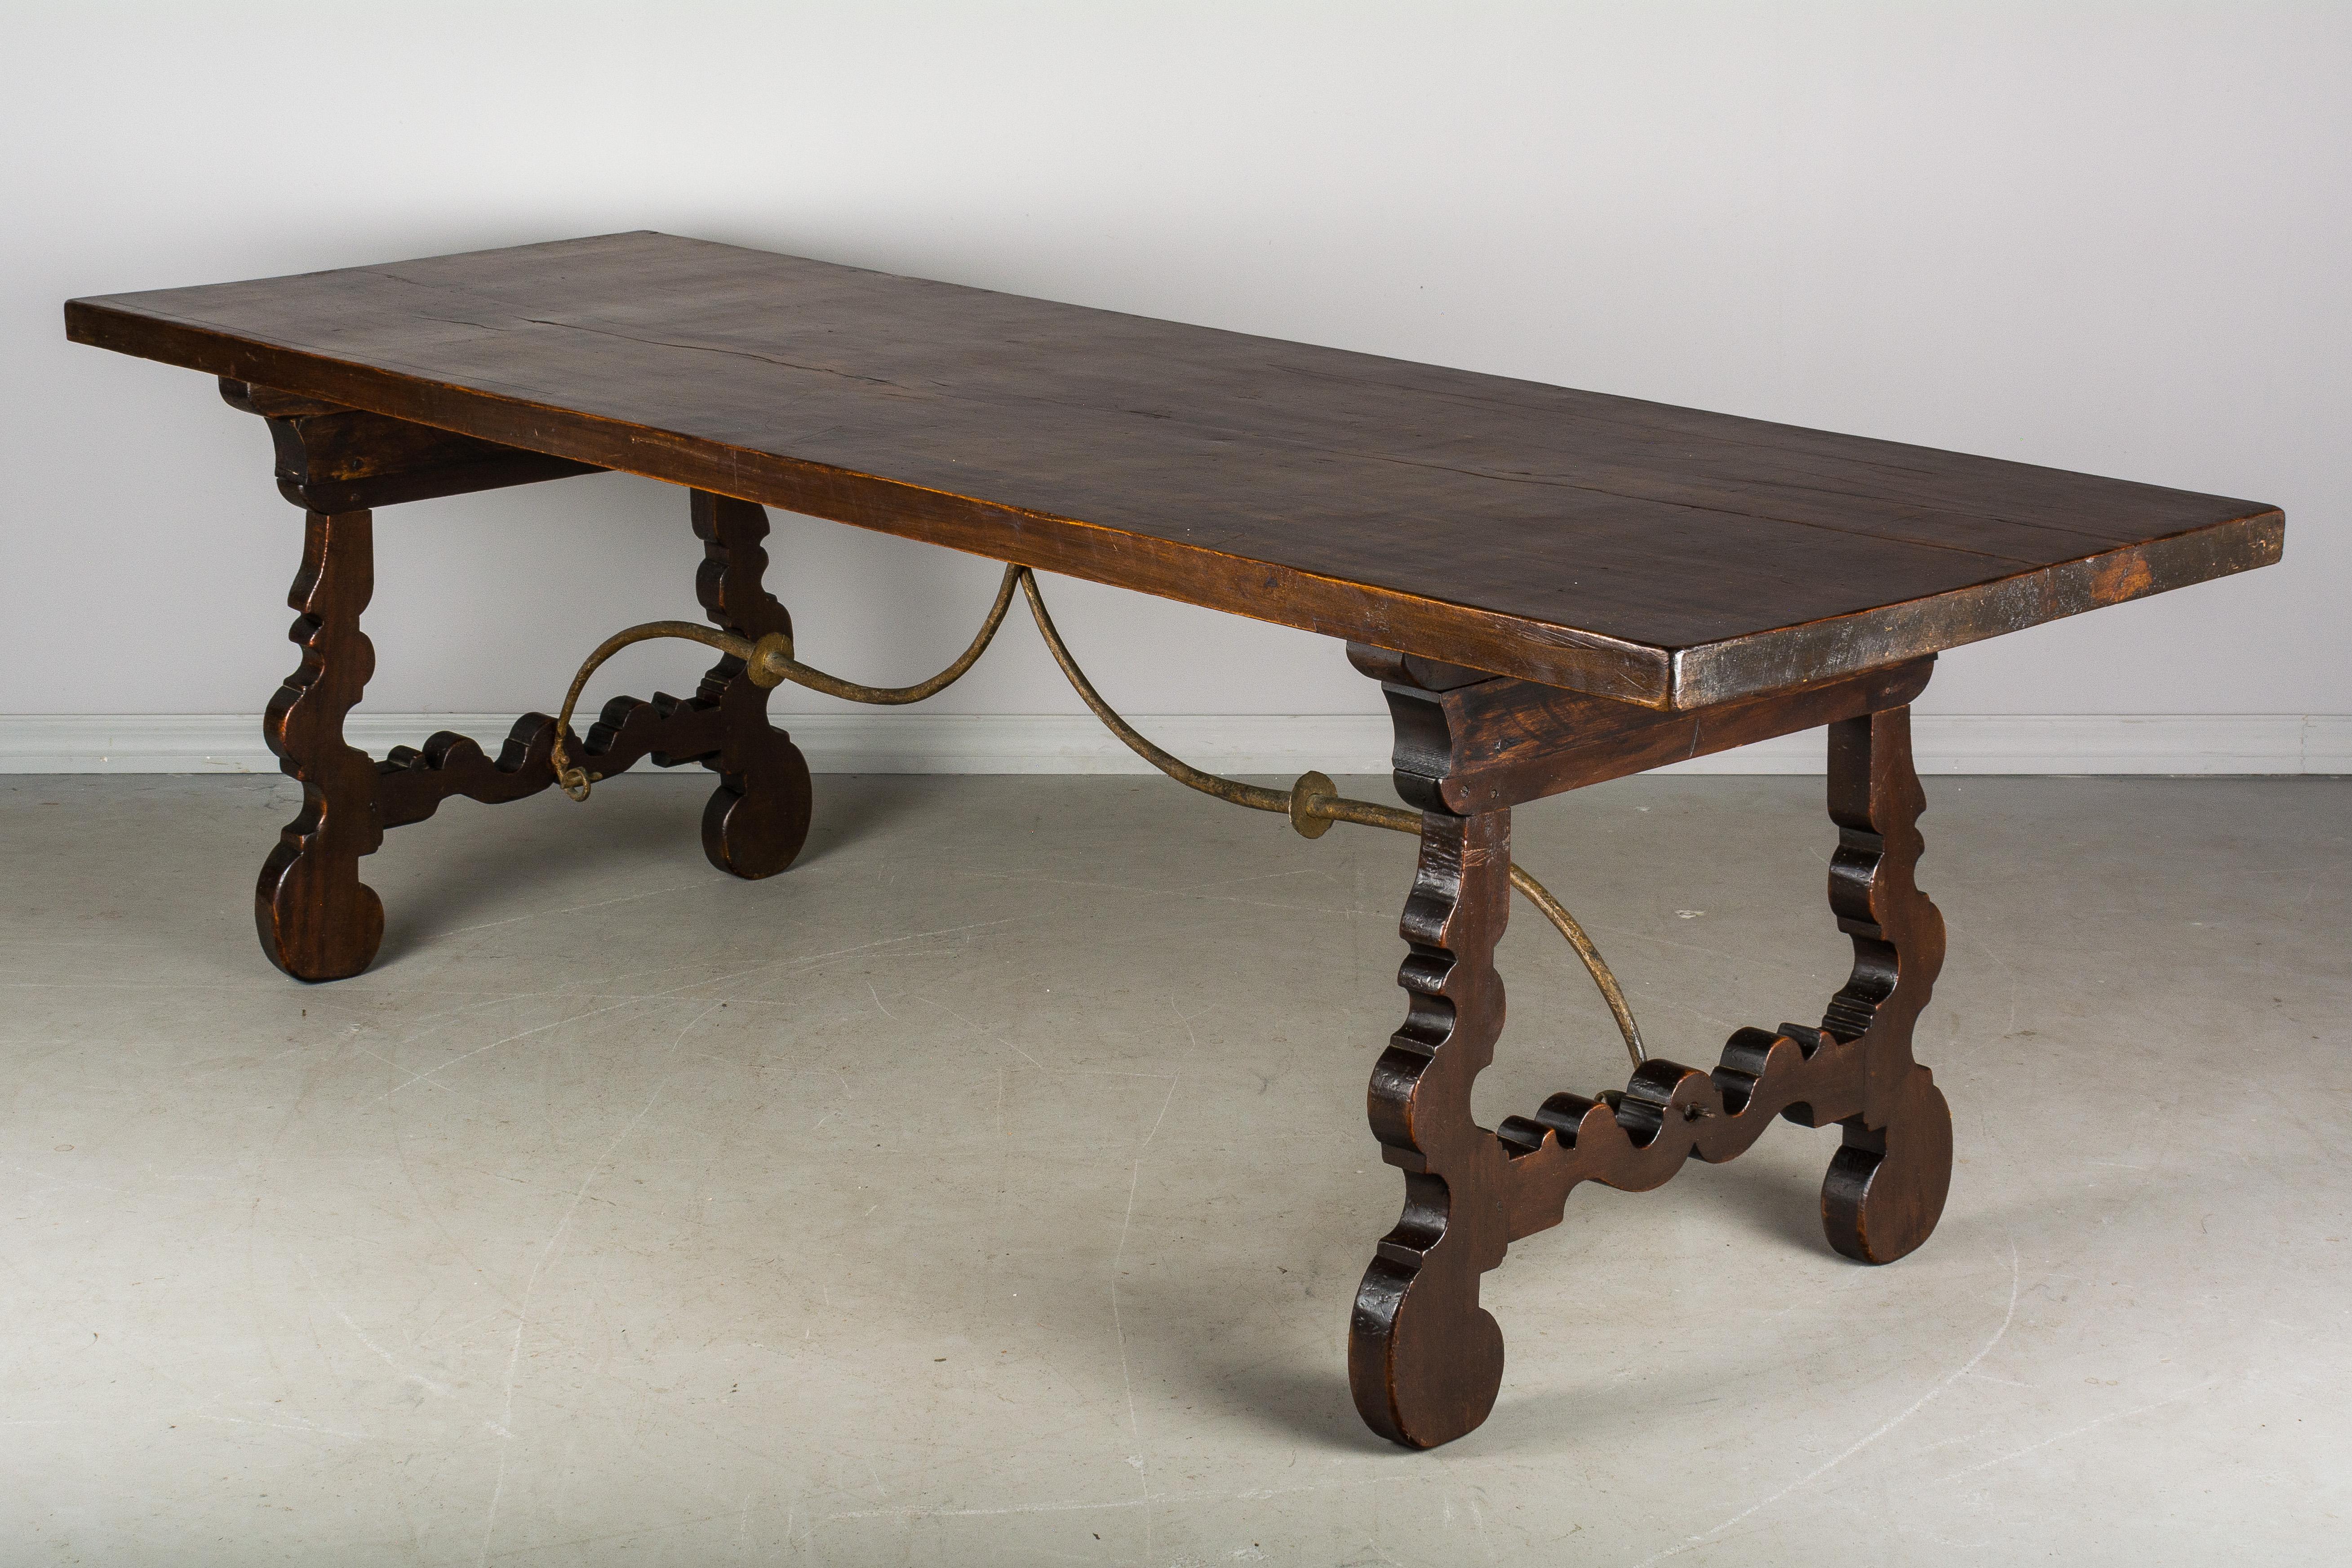 A Spanish Baroque style refectory table made of solid walnut with lyre shaped legs joined by wrought iron stretchers. The top is made from a single, 2